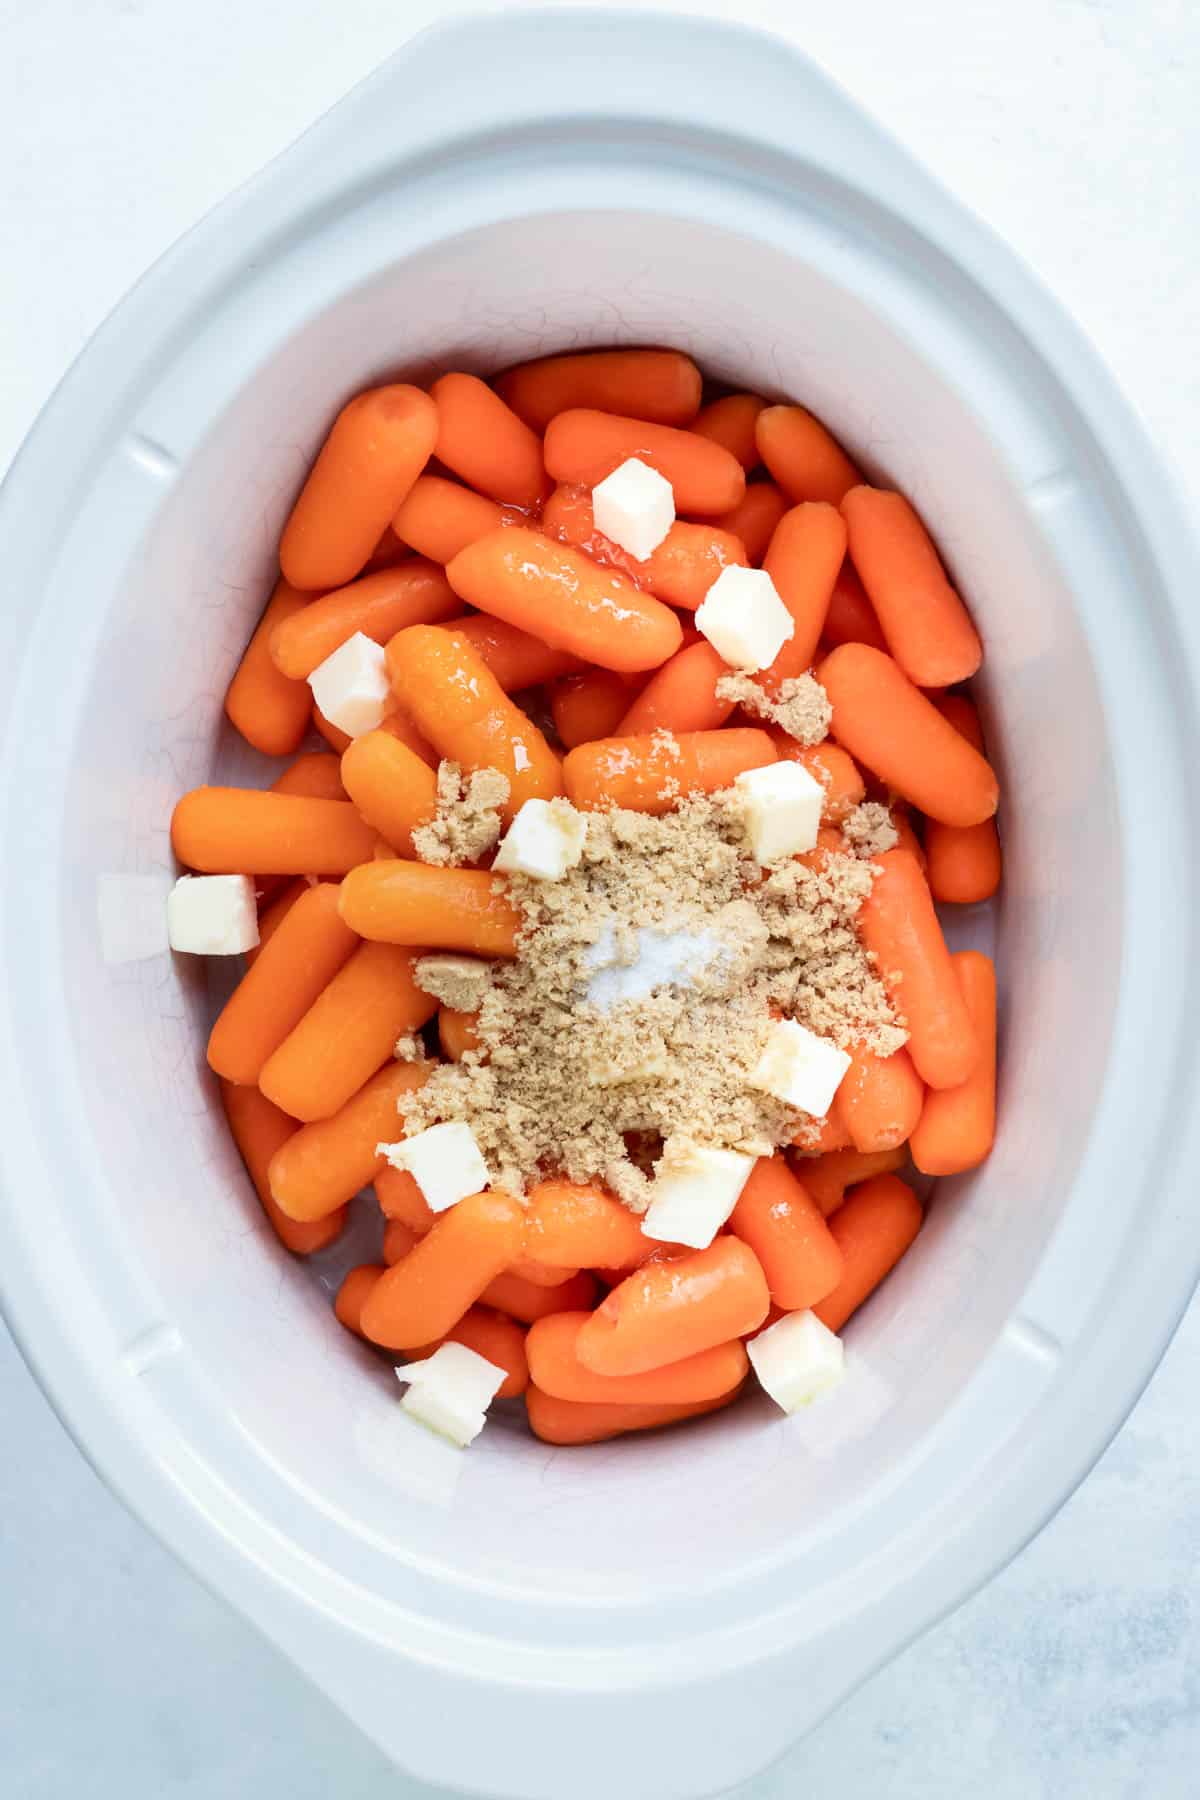 Carrots in a Crock-Pot with brown sugar and honey.